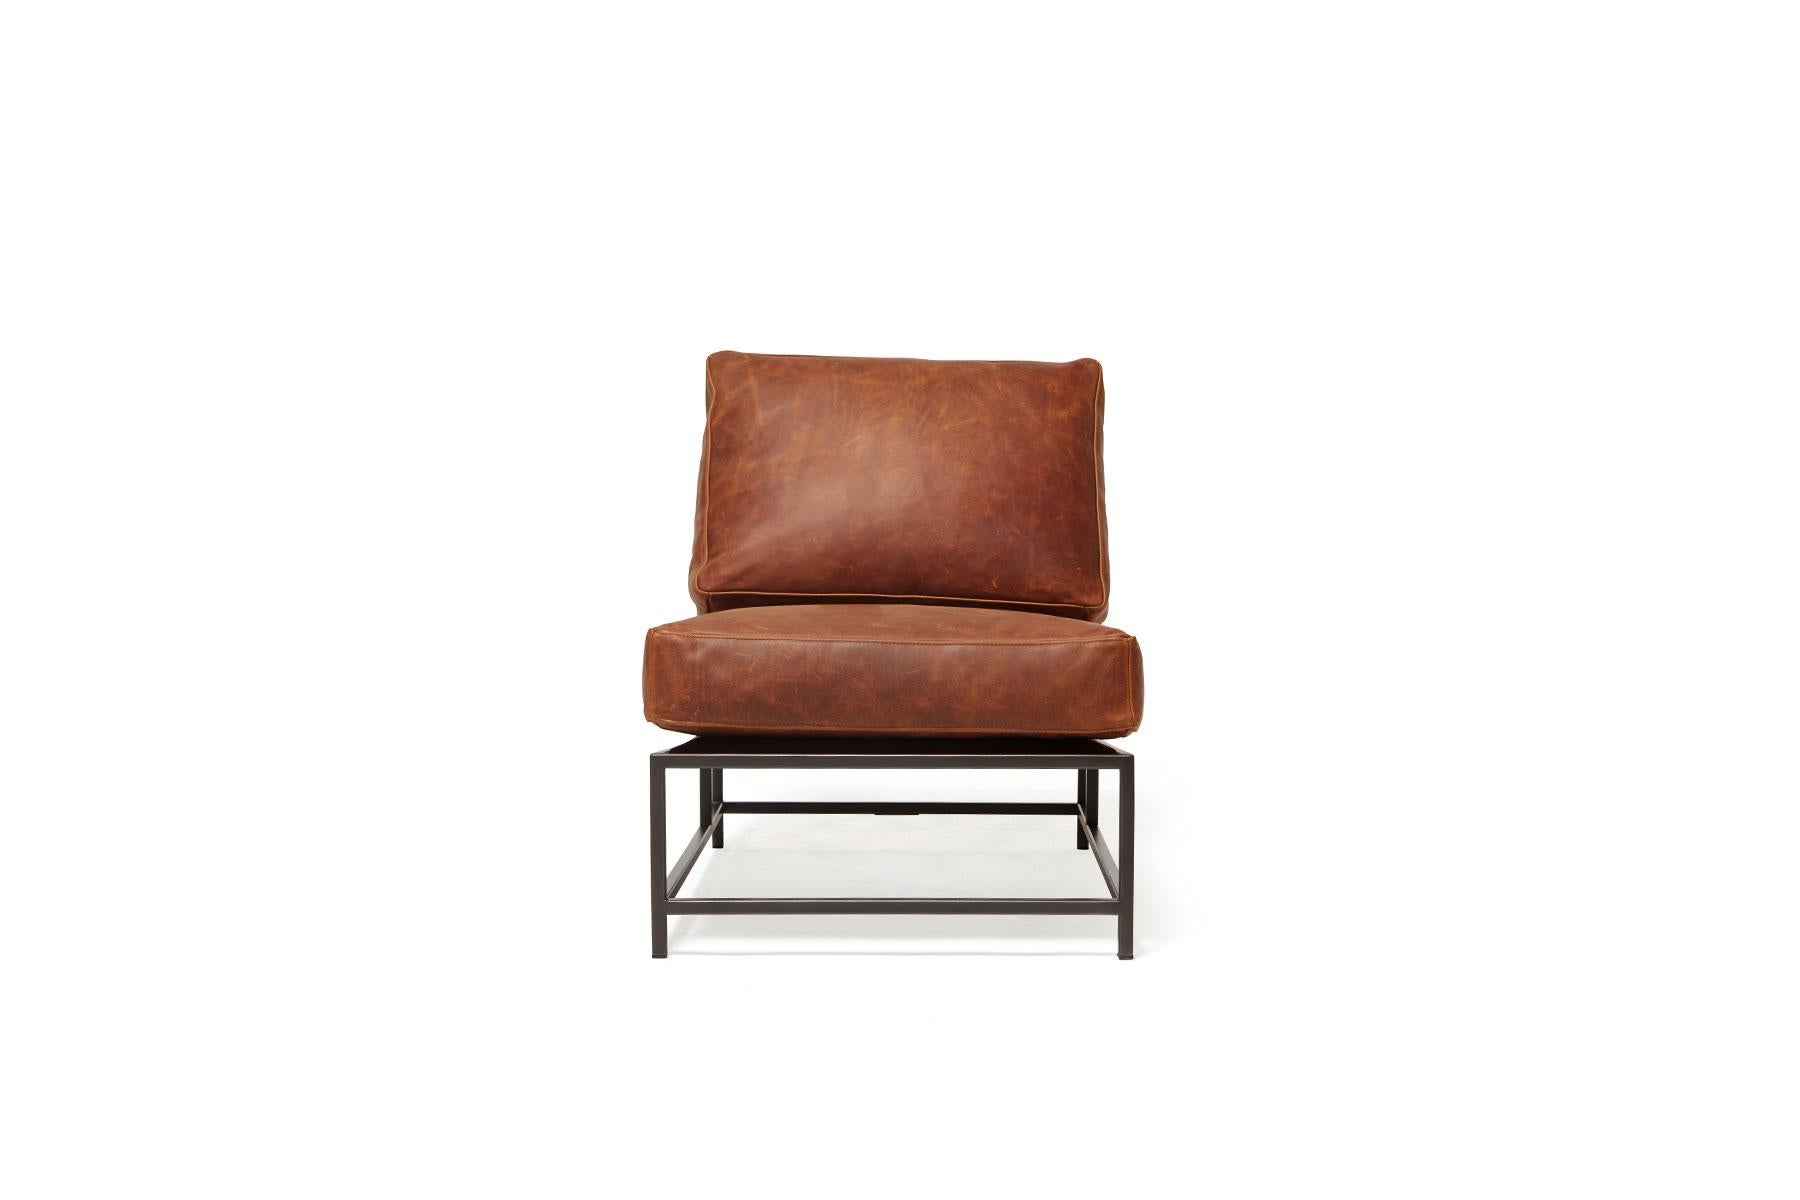 Sleek and refined, the Inheritance Collection Chair by Stephen Kenn is a great addition to nearly any space. 

This variation is upholstered in a beautiful reddish tan waxed leather from the Brentwood collection by Moore & Giles for an effortlessly